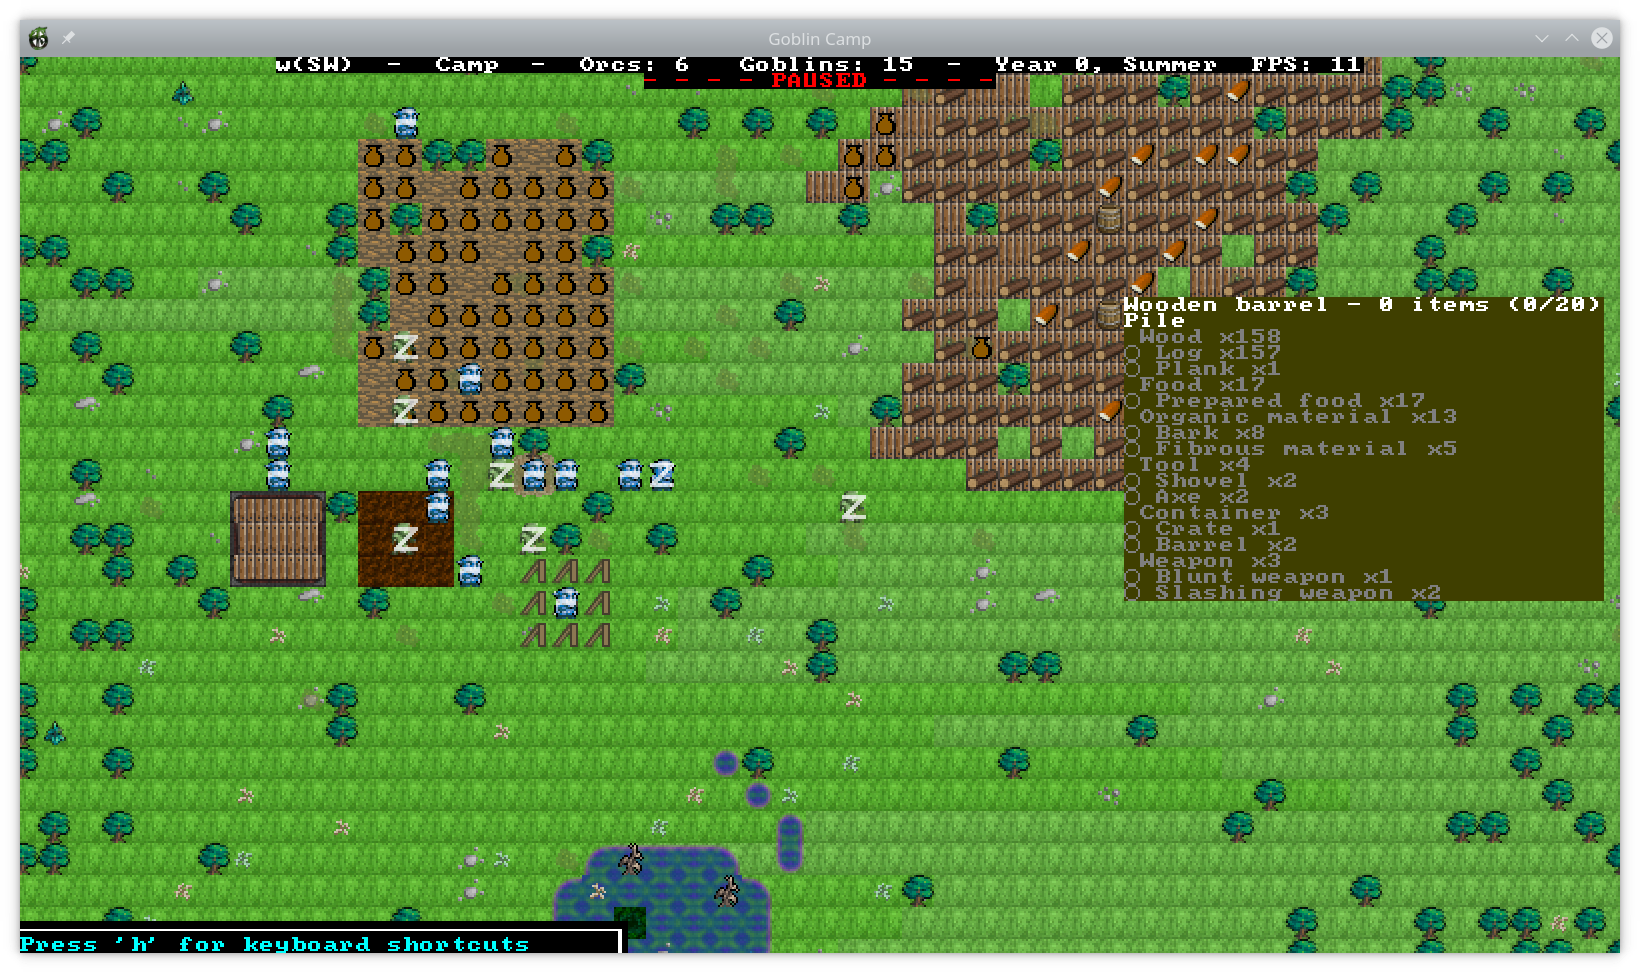 Goblin Camp v0.23 with graphical tiles